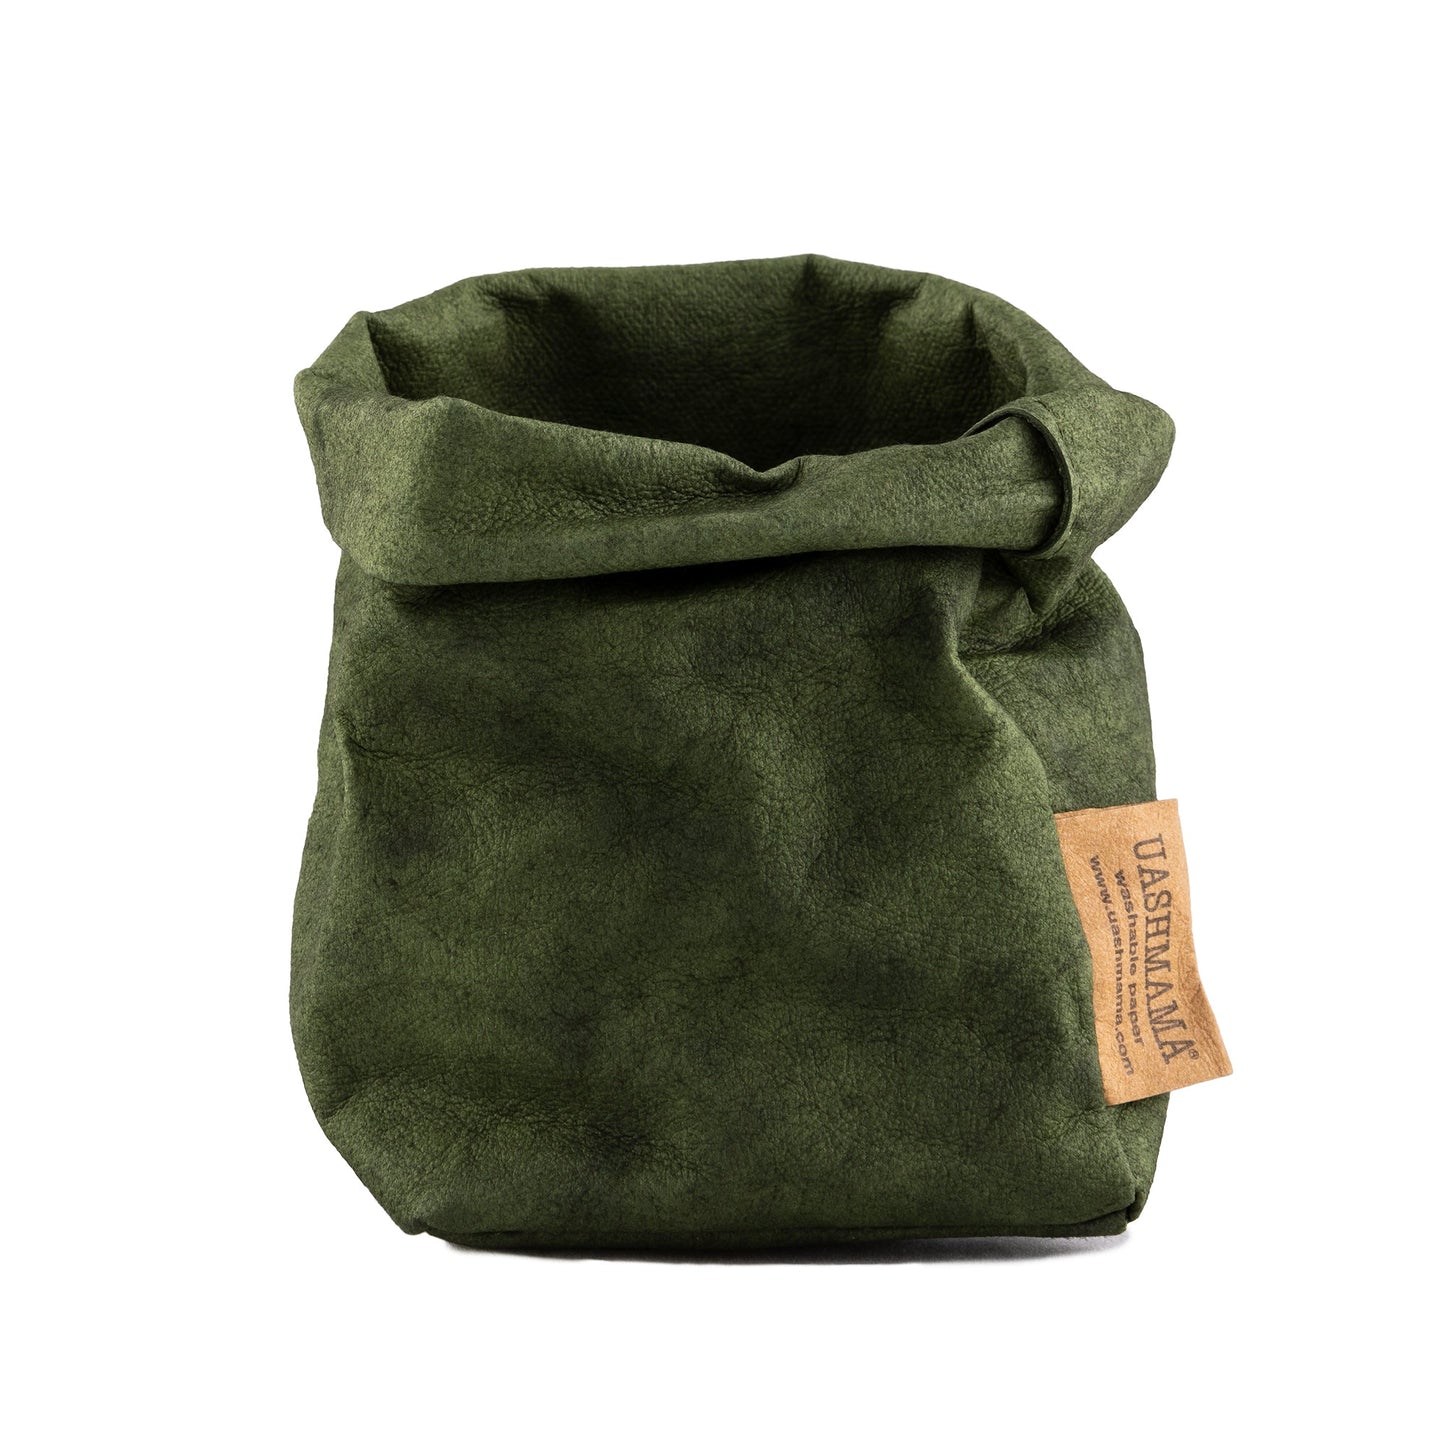 A washable paper bag is shown. The bag is rolled down at the top and features a UASHMAMA logo label on the bottom left corner. The bag pictured is the piccolo size in dark green.